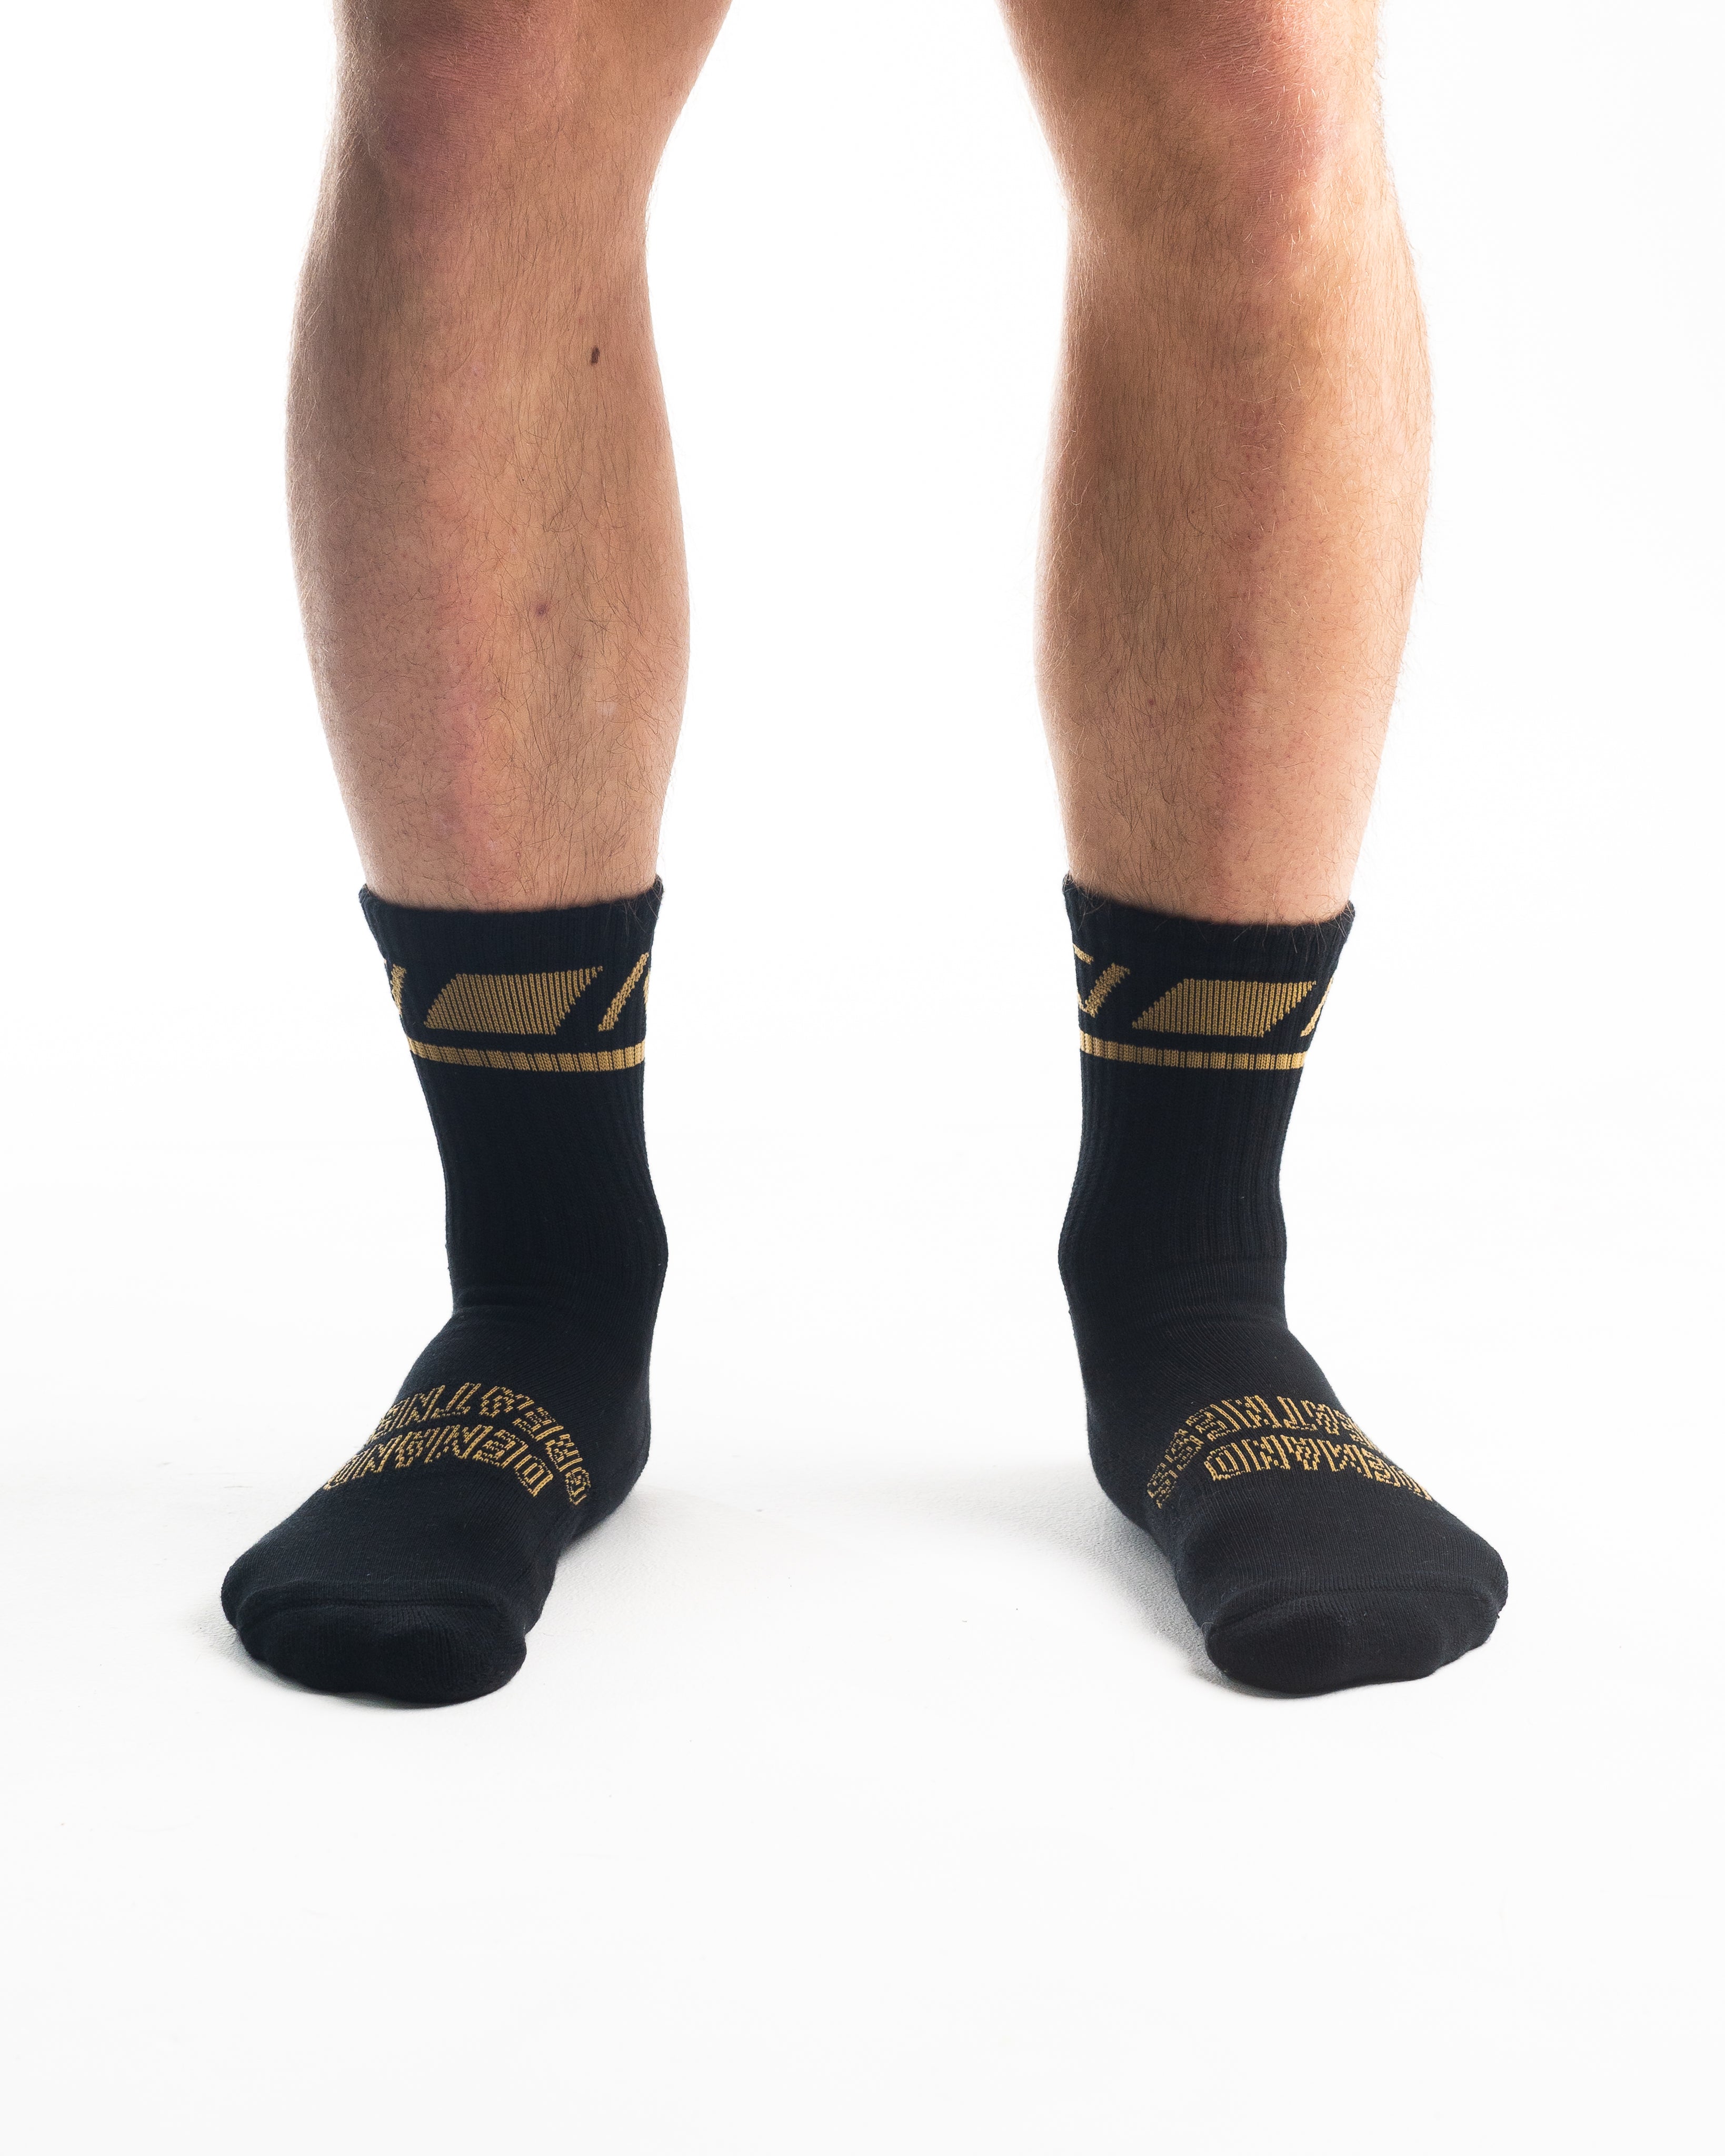 A7 Gold Standard Crew socks showcase gold logos and let your energy show on the platform, in your training or while out and about. The IPF Approved Gold Standard Meet Kit includes Powerlifting Singlet, A7 Meet Shirt, A7 Zebra Wrist Wraps, A7 Deadlift Socks, Hourglass Knee Sleeves (Stiff Knee Sleeves and Rigor Mortis Knee Sleeves). Genouillères powerlifting shipping to France, Spain, Ireland, Germany, Italy, Sweden and EU.